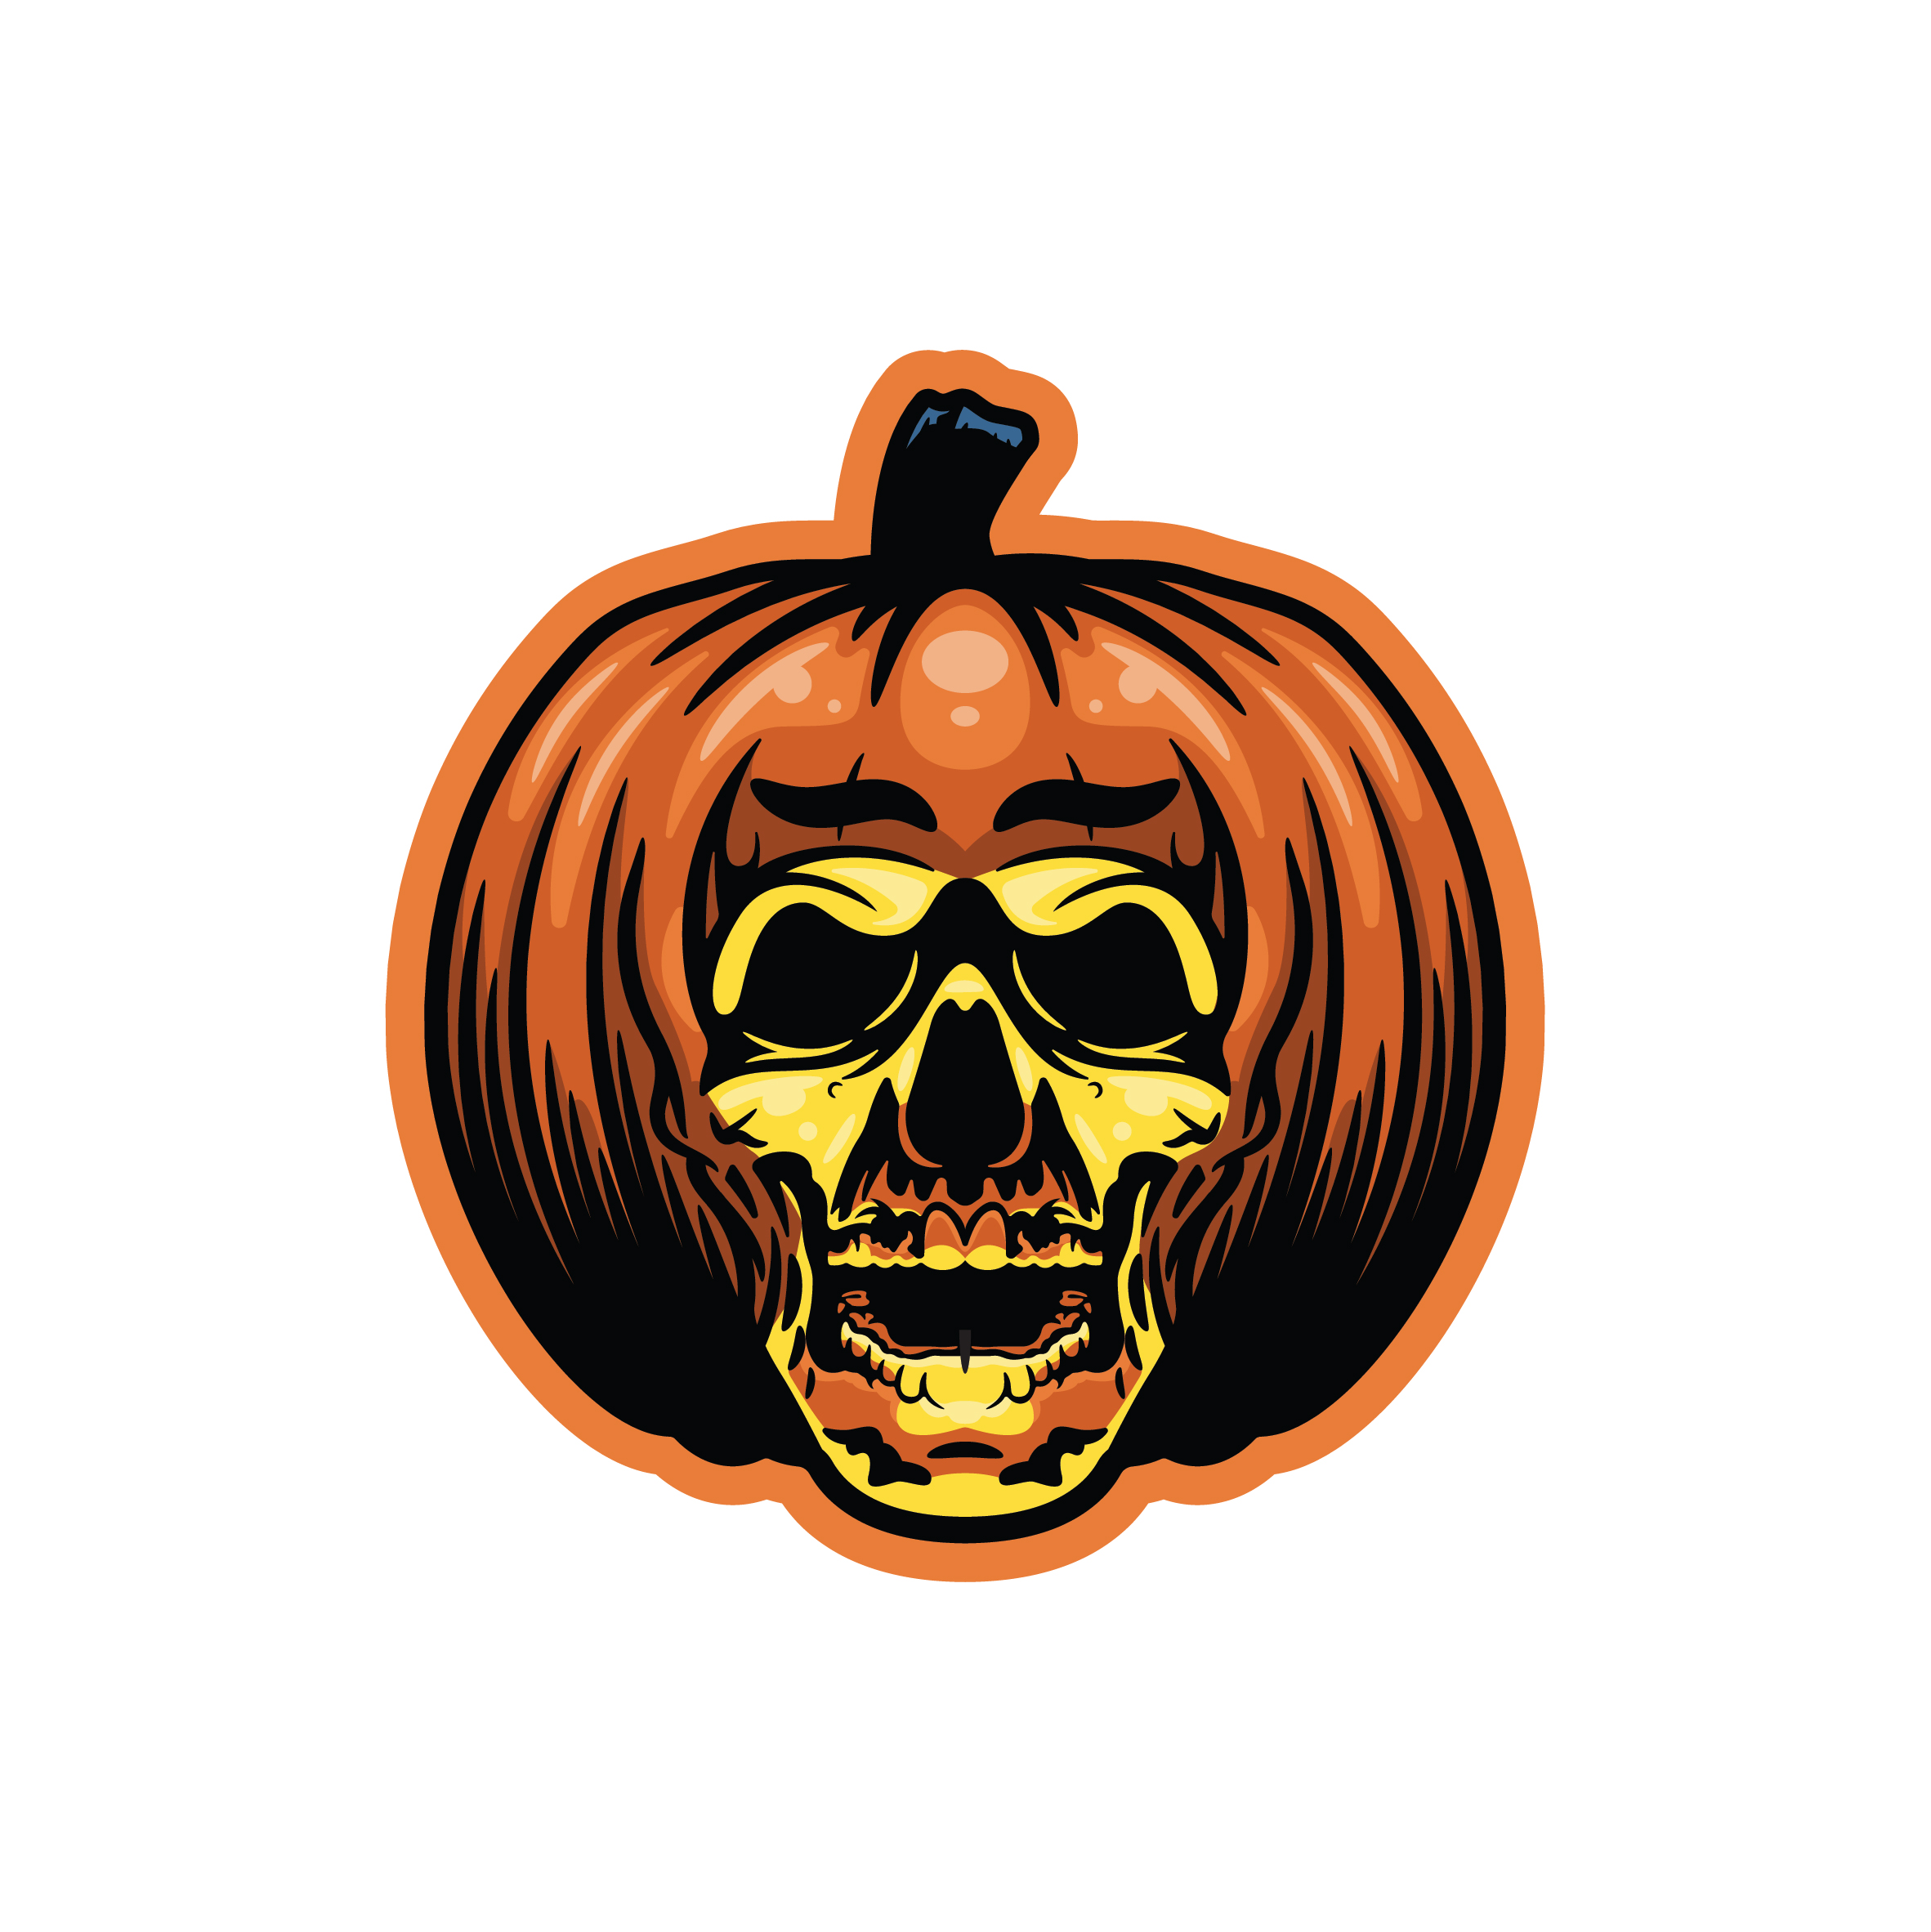 Halloween 2  logo design by logo designer Tortoiseshell Black for your inspiration and for the worlds largest logo competition